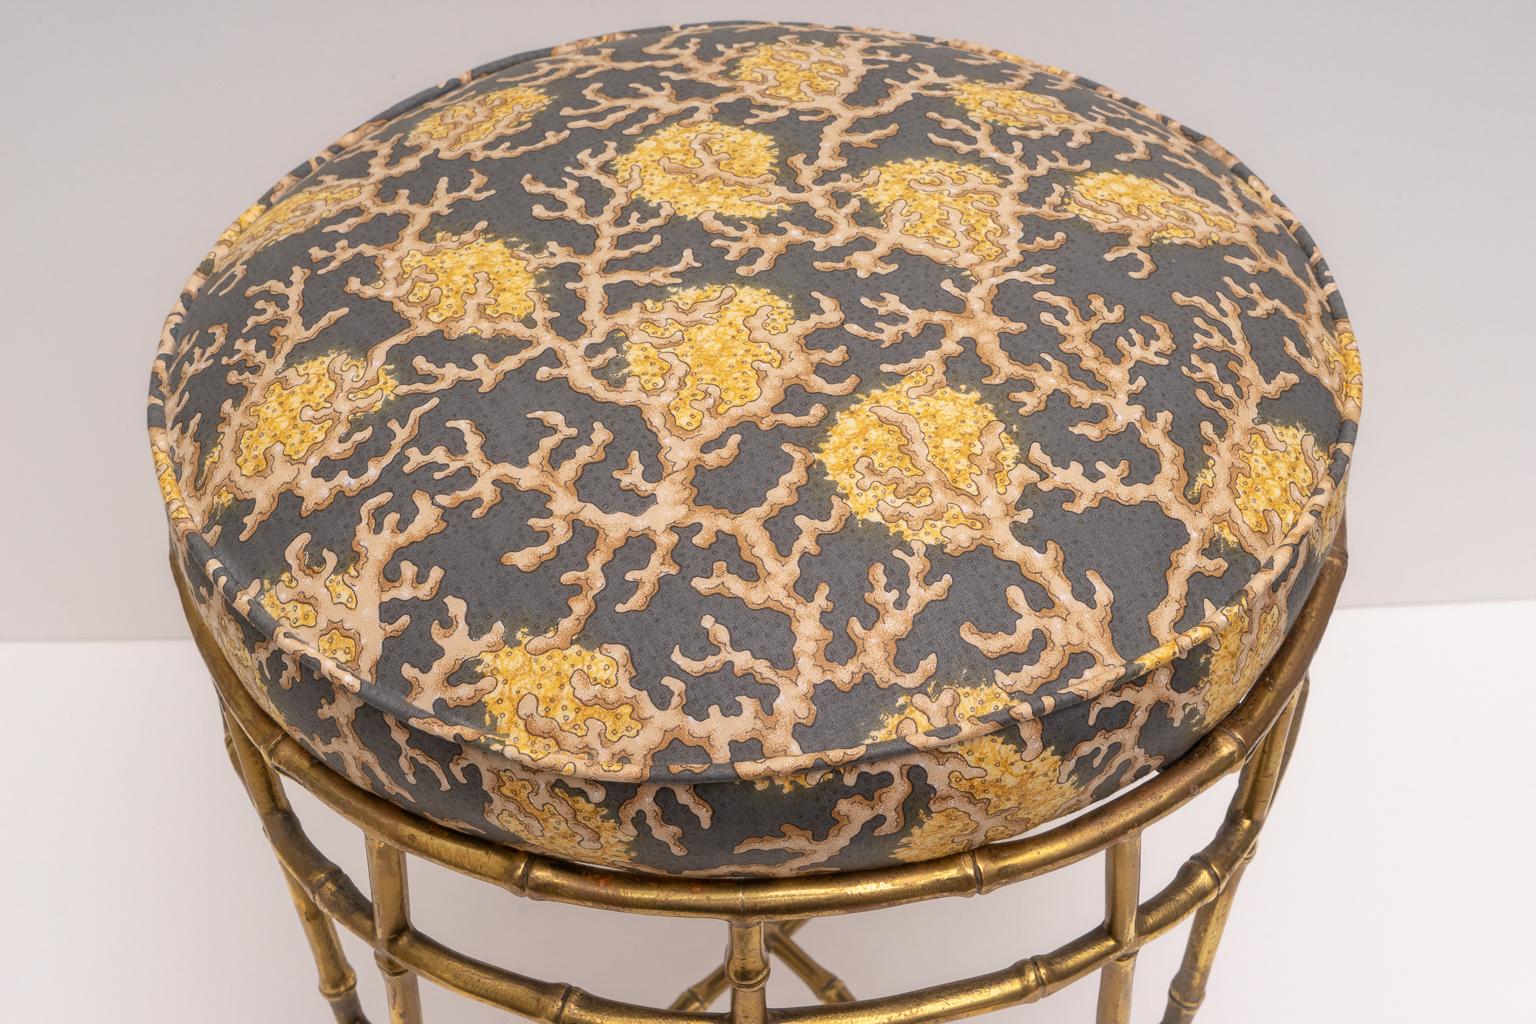 This stylish and chic vanity stool was acquired from a Palm Beach estate and it is very much in the style and quality of pieces designed by Maison Baguès, with its cast brass faux bamboo motif. 

Note: The piece was professionally upholstered in a